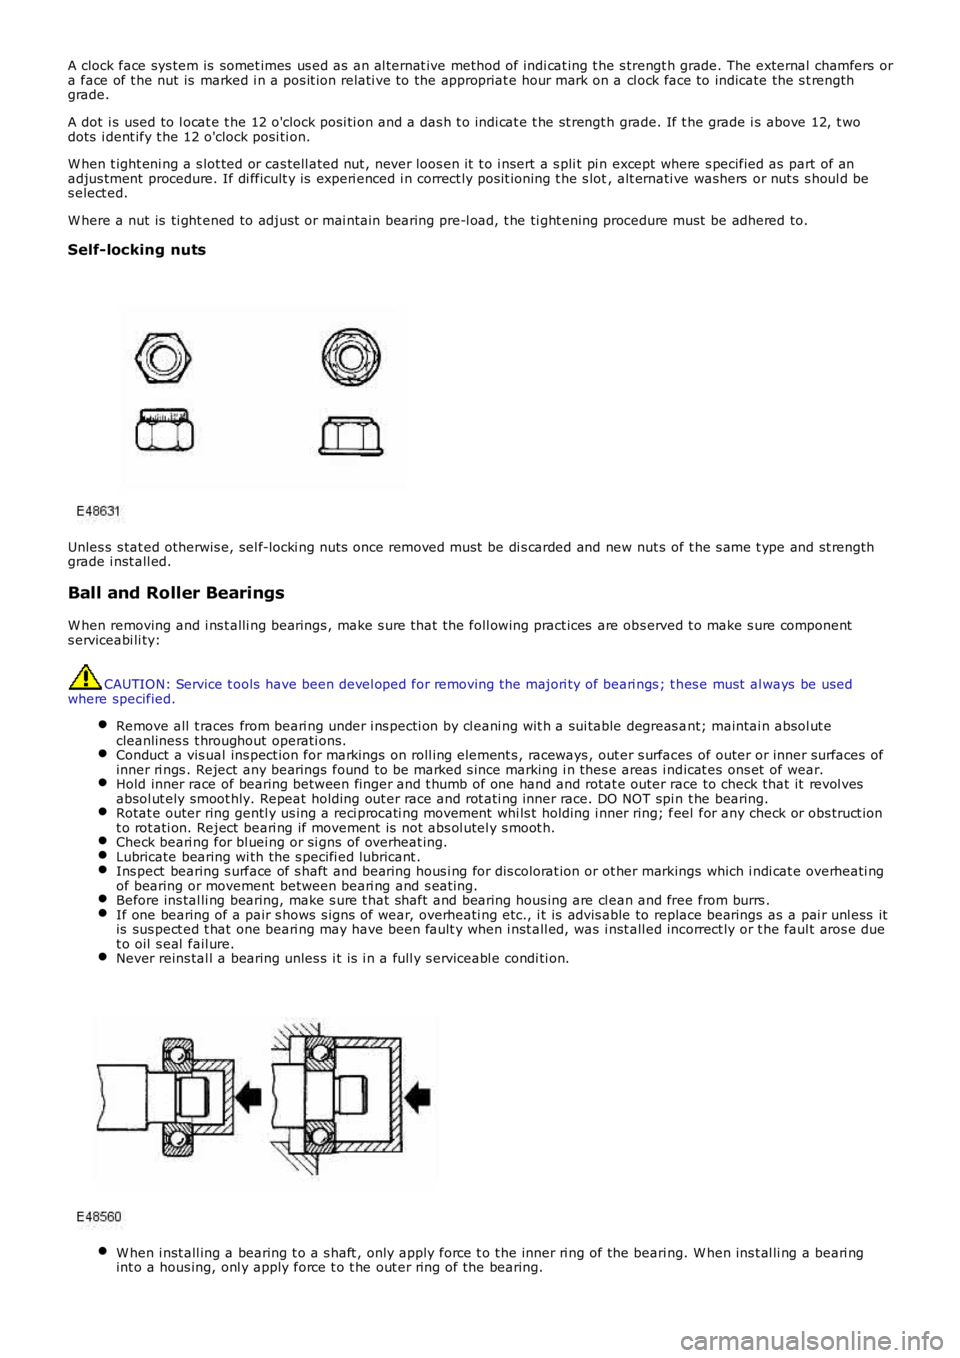 LAND ROVER FRELANDER 2 2006  Repair Manual A clock face sys tem is  somet imes  us ed as  an al ternat ive method of indi cat ing t he s trengt h grade. The external  chamfers ora face of t he nut is  marked i n a pos it ion relati ve to the a